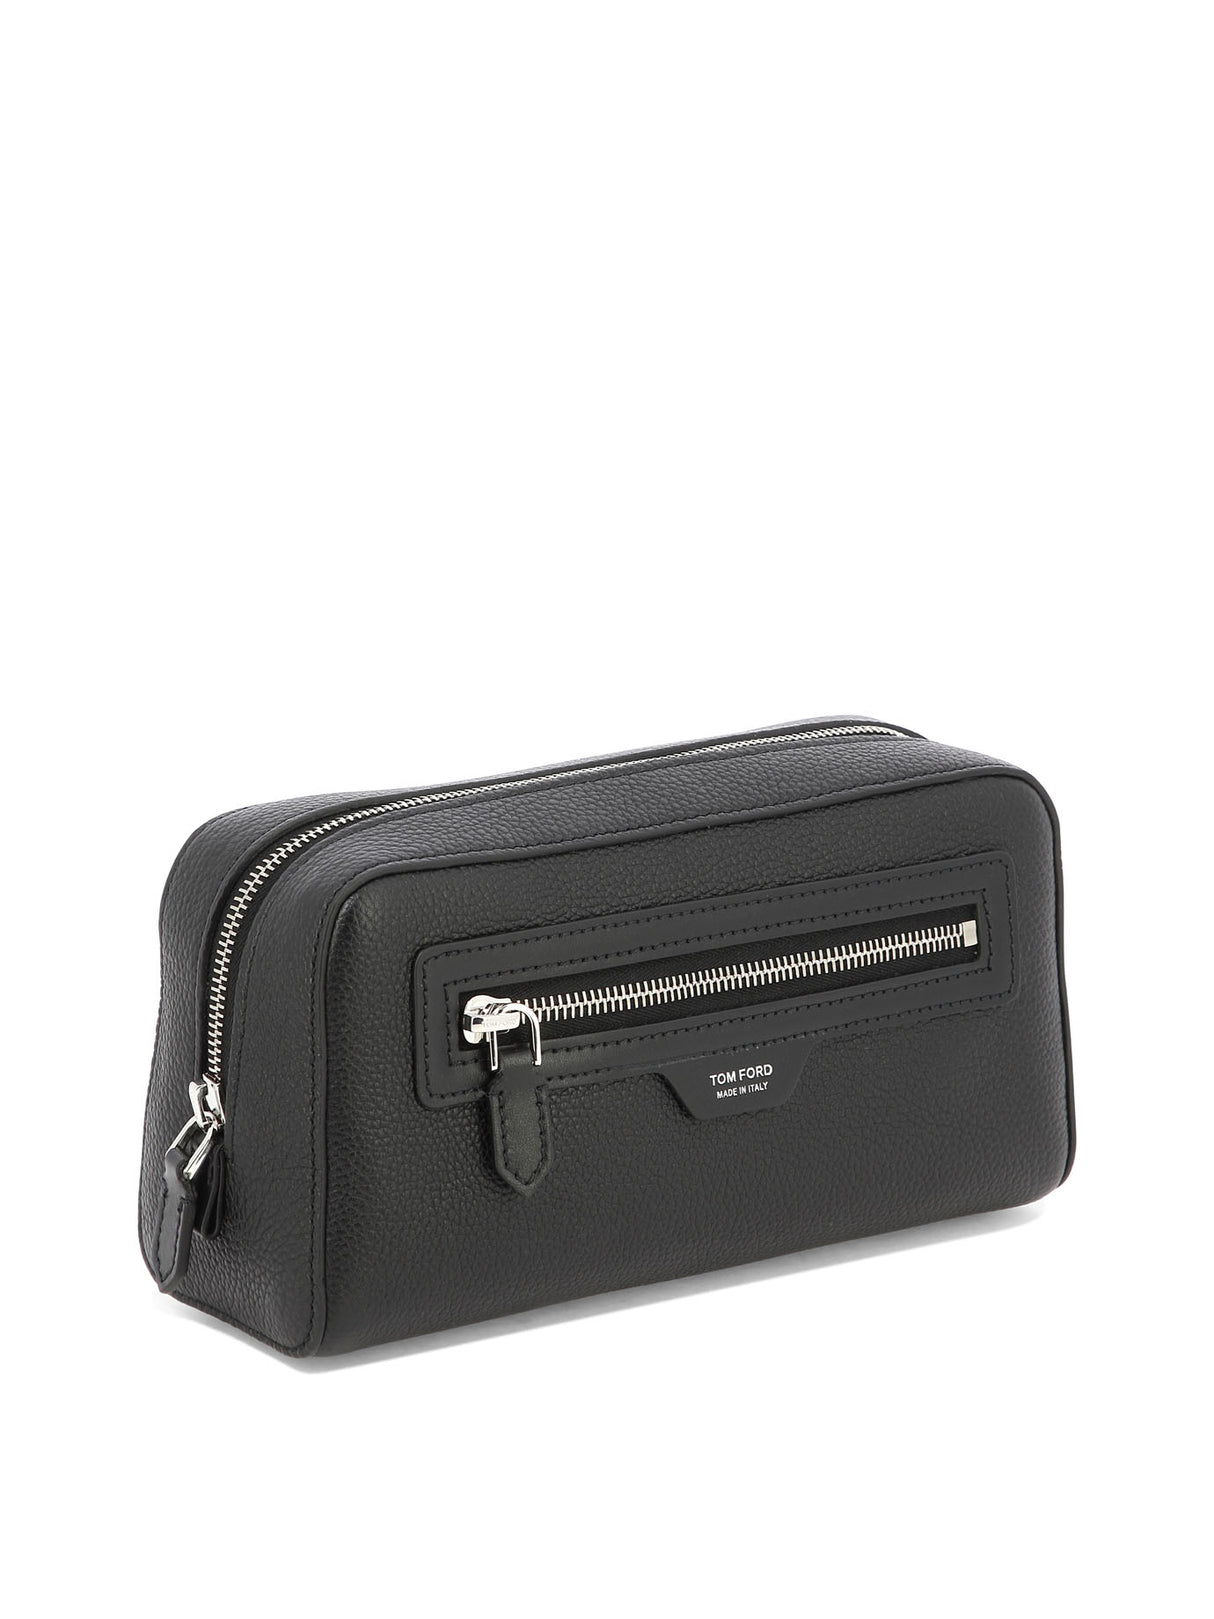 TOM FORD Men's Black Leather Beauty Case for SS24